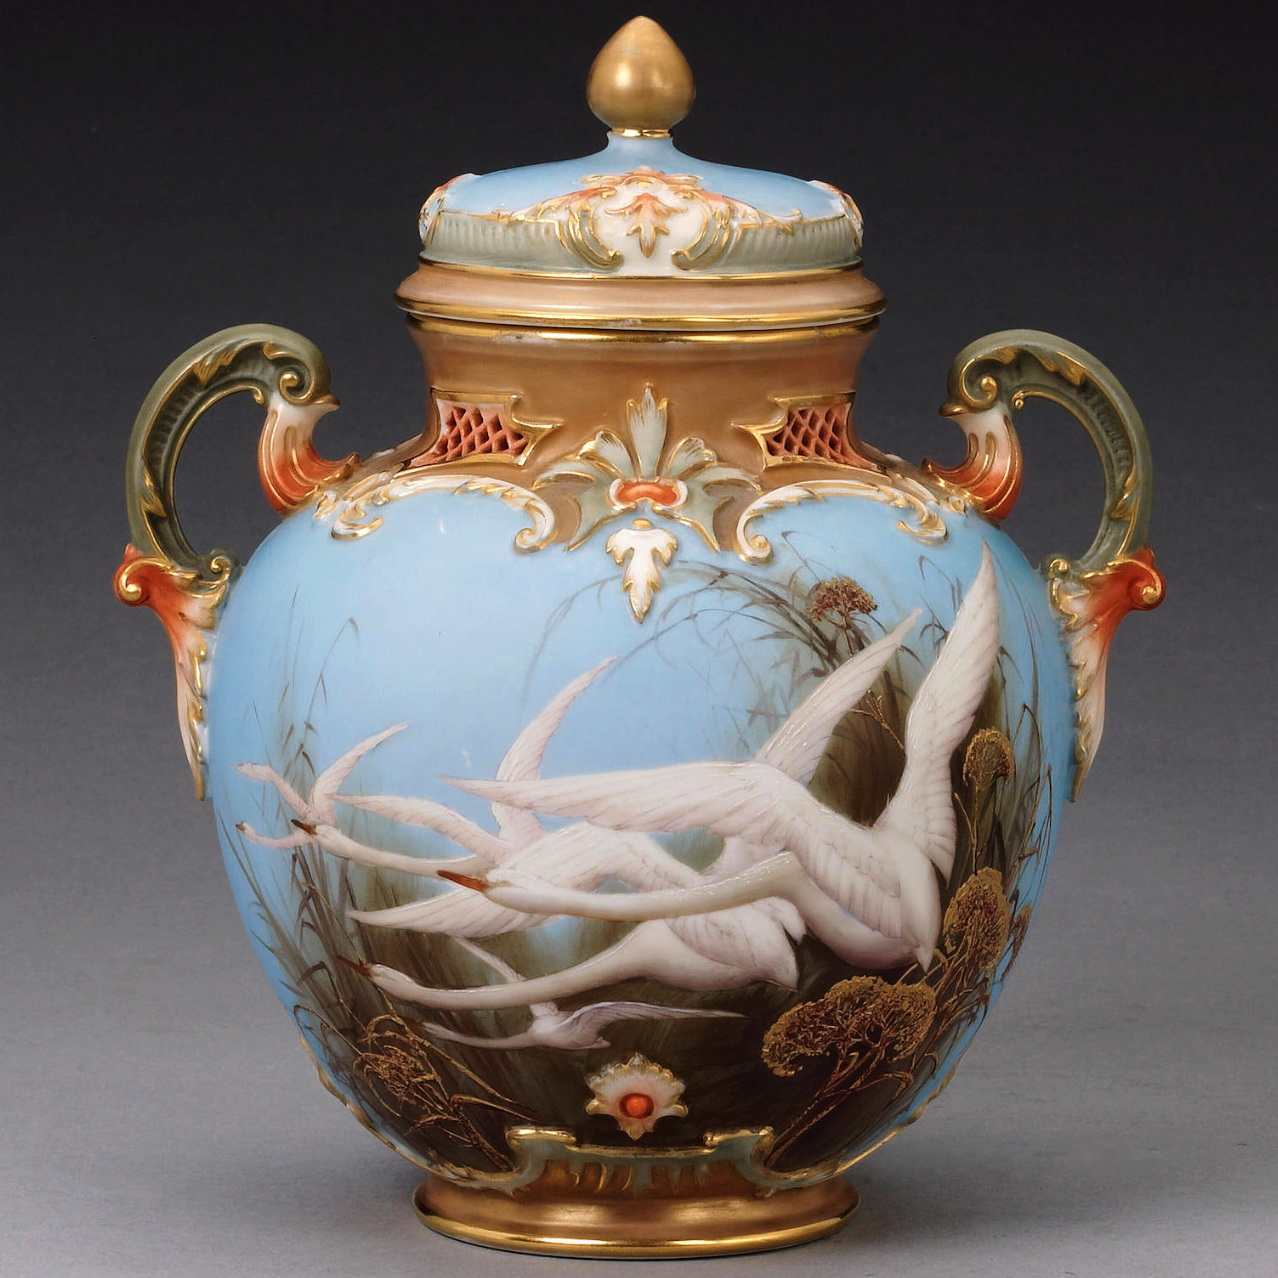 Royal Worcester covered jar hand painted with swans by Charles Baldwyn